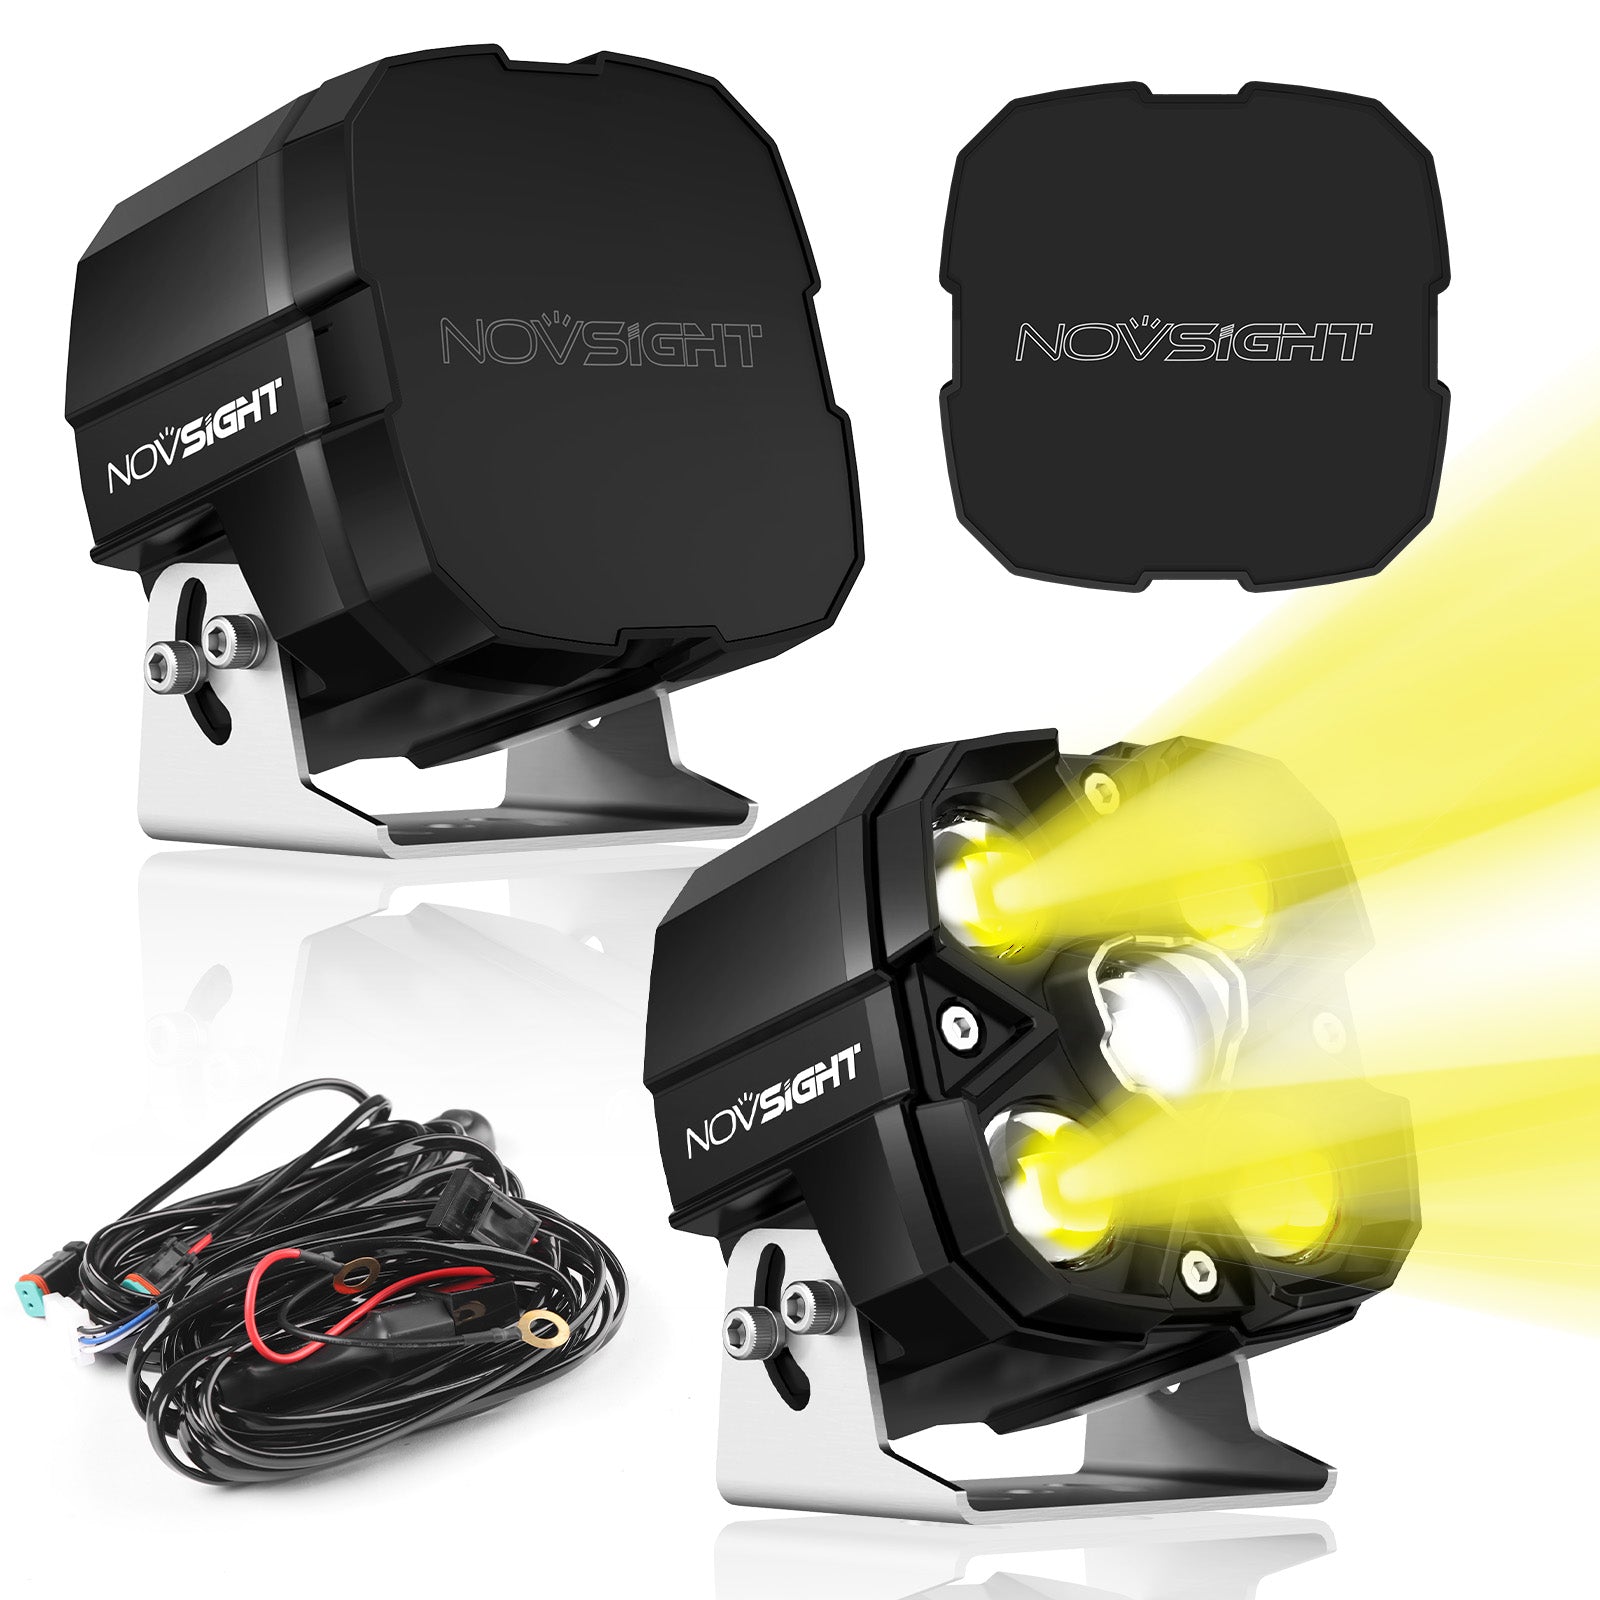 CYBER 1 Series | 4 Inch Off-road LED Pods Driving Light Yellow and White with Dual Beam Modes Driving and Spot - NOVSIGHT